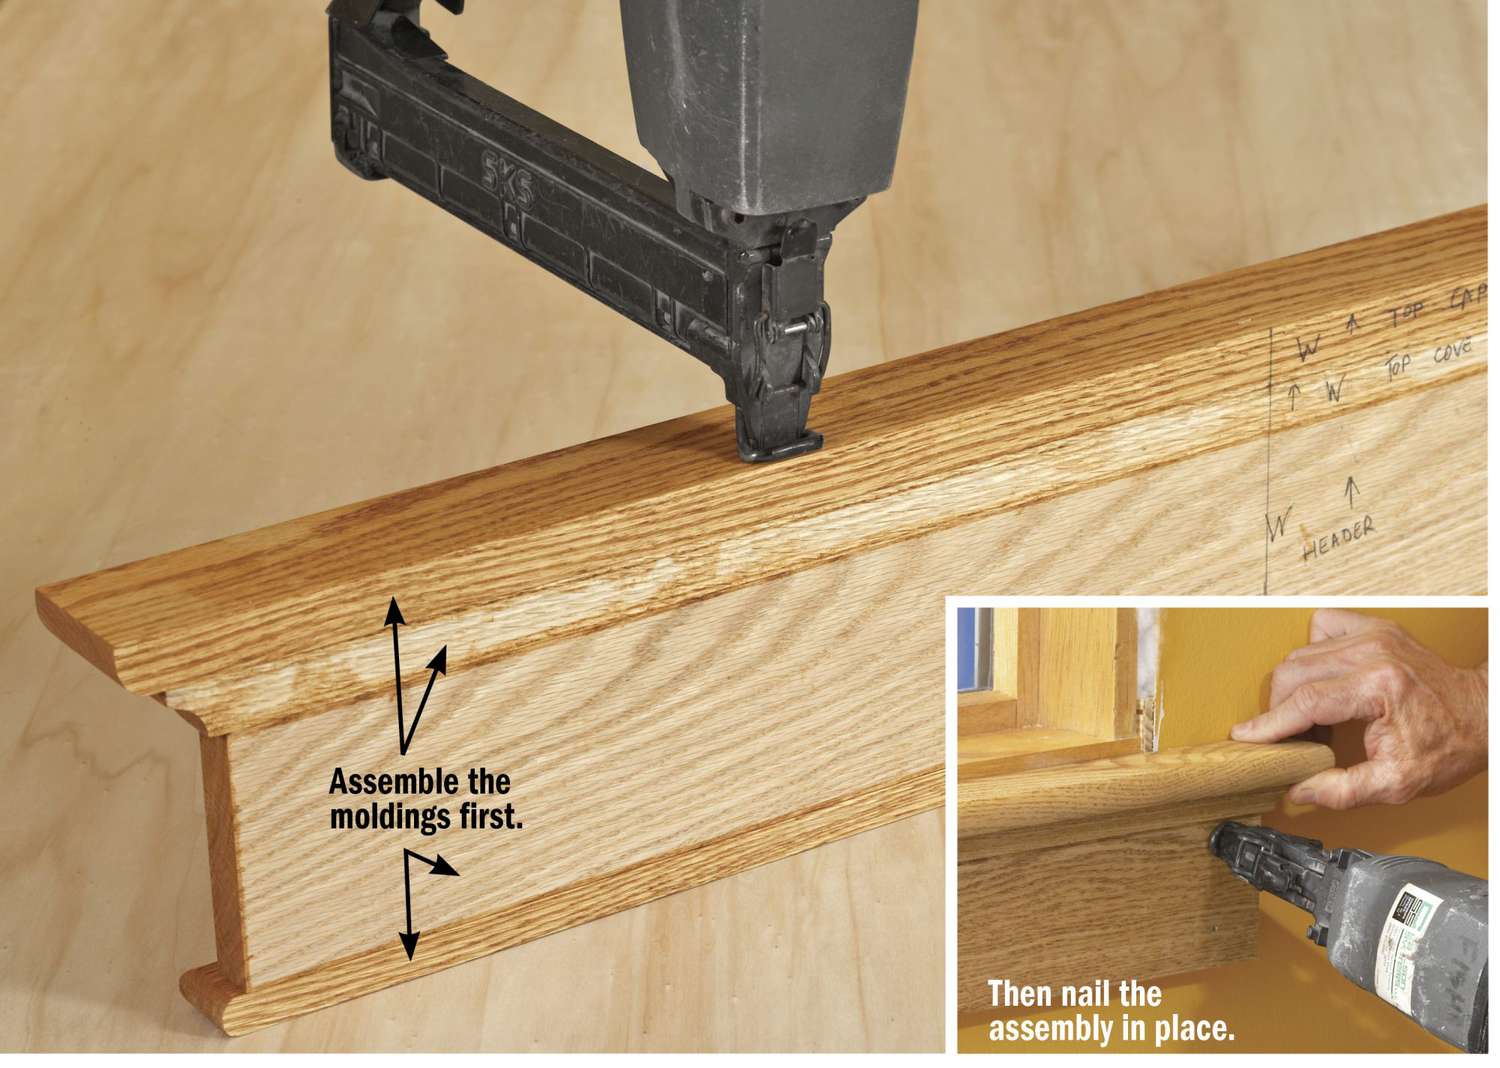 Photo showing assembled moldings and air nailer